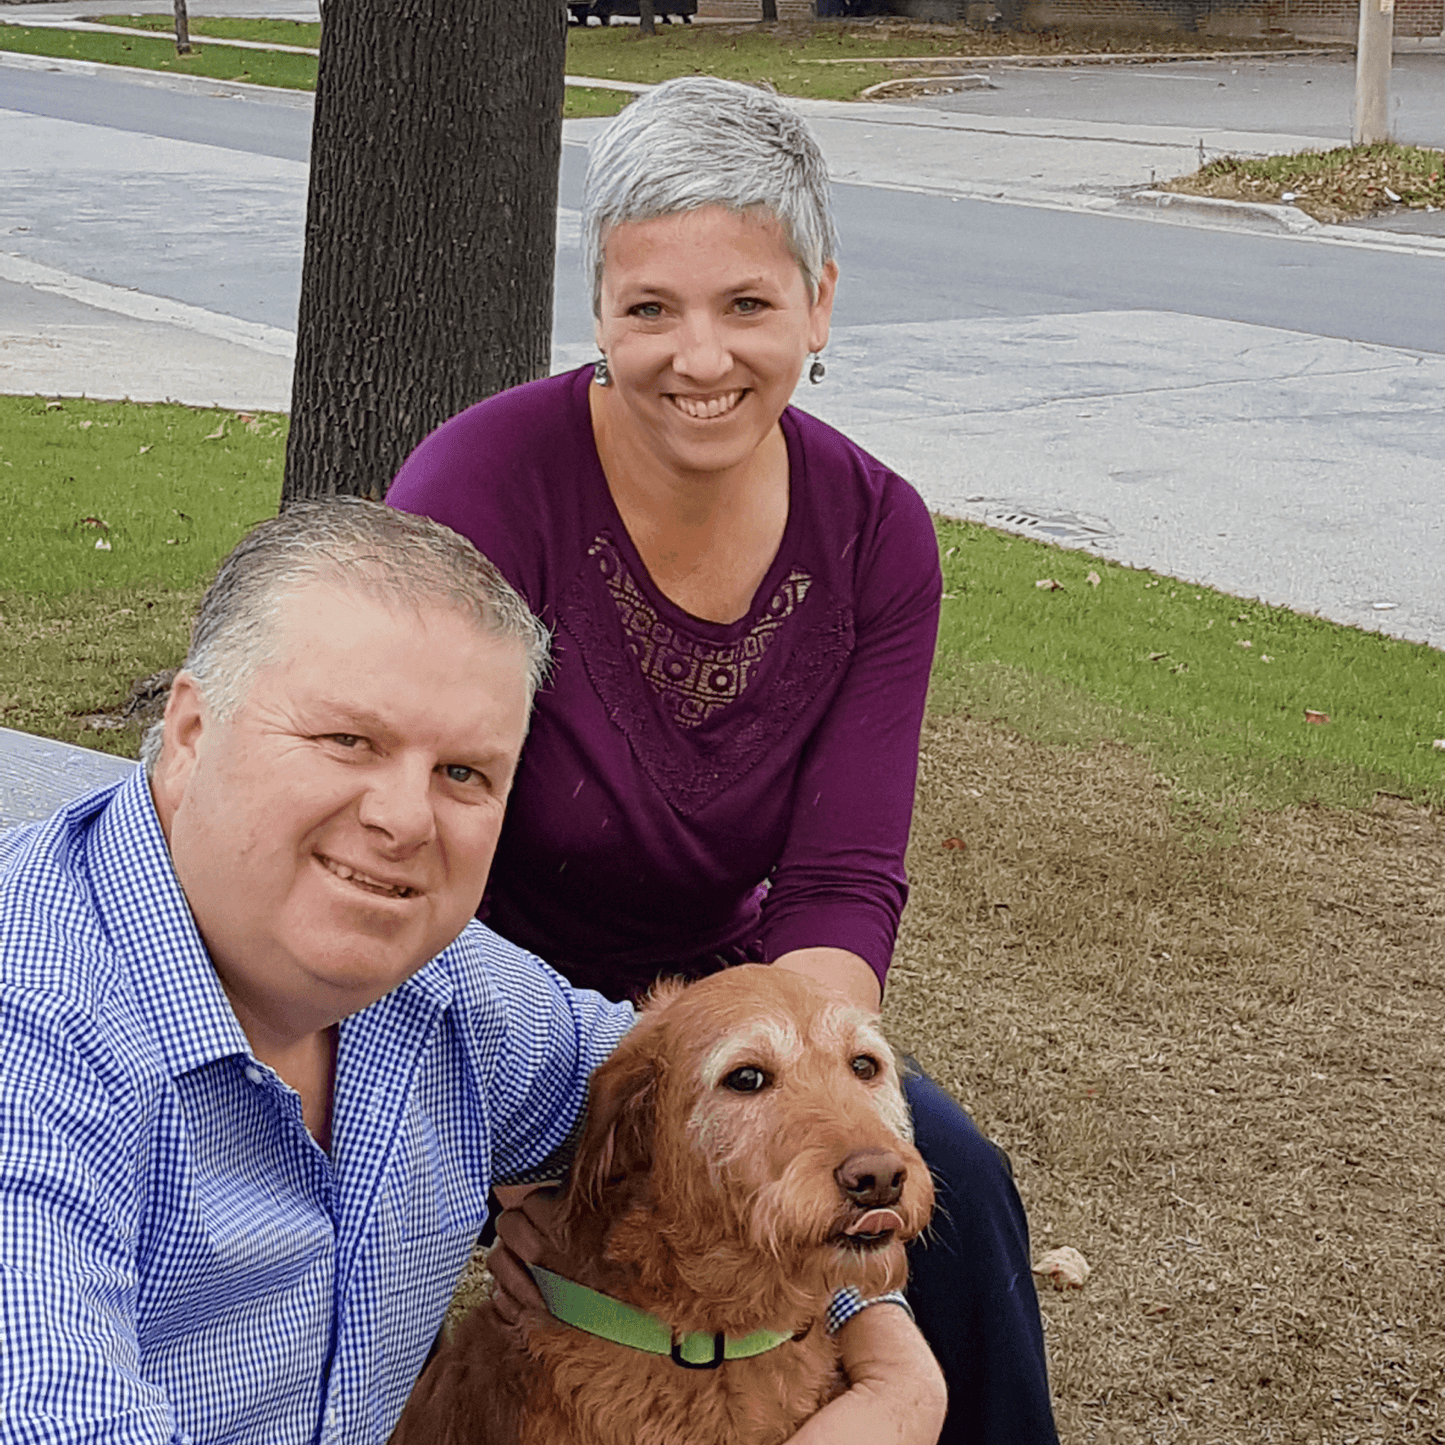 Joe and Margot and their dog Alice | Crumps' Naturals